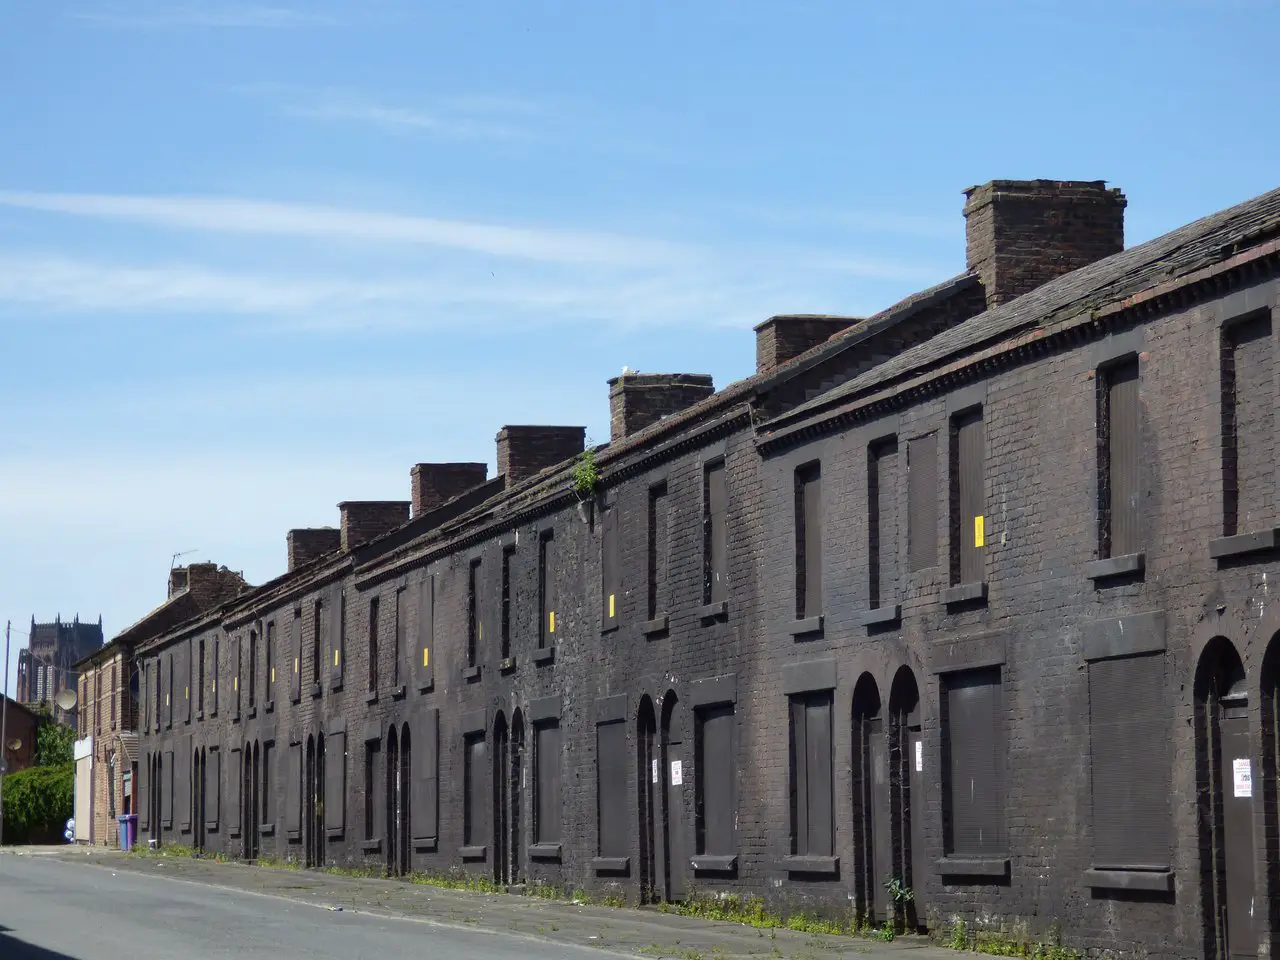 Derelict terraced houses on Powis Street in Toxteth, Liverpool painted black for use as a set for the TV series Peaky Blinders. You can visit this street on Liverpool Peaky Blinders bus tours.